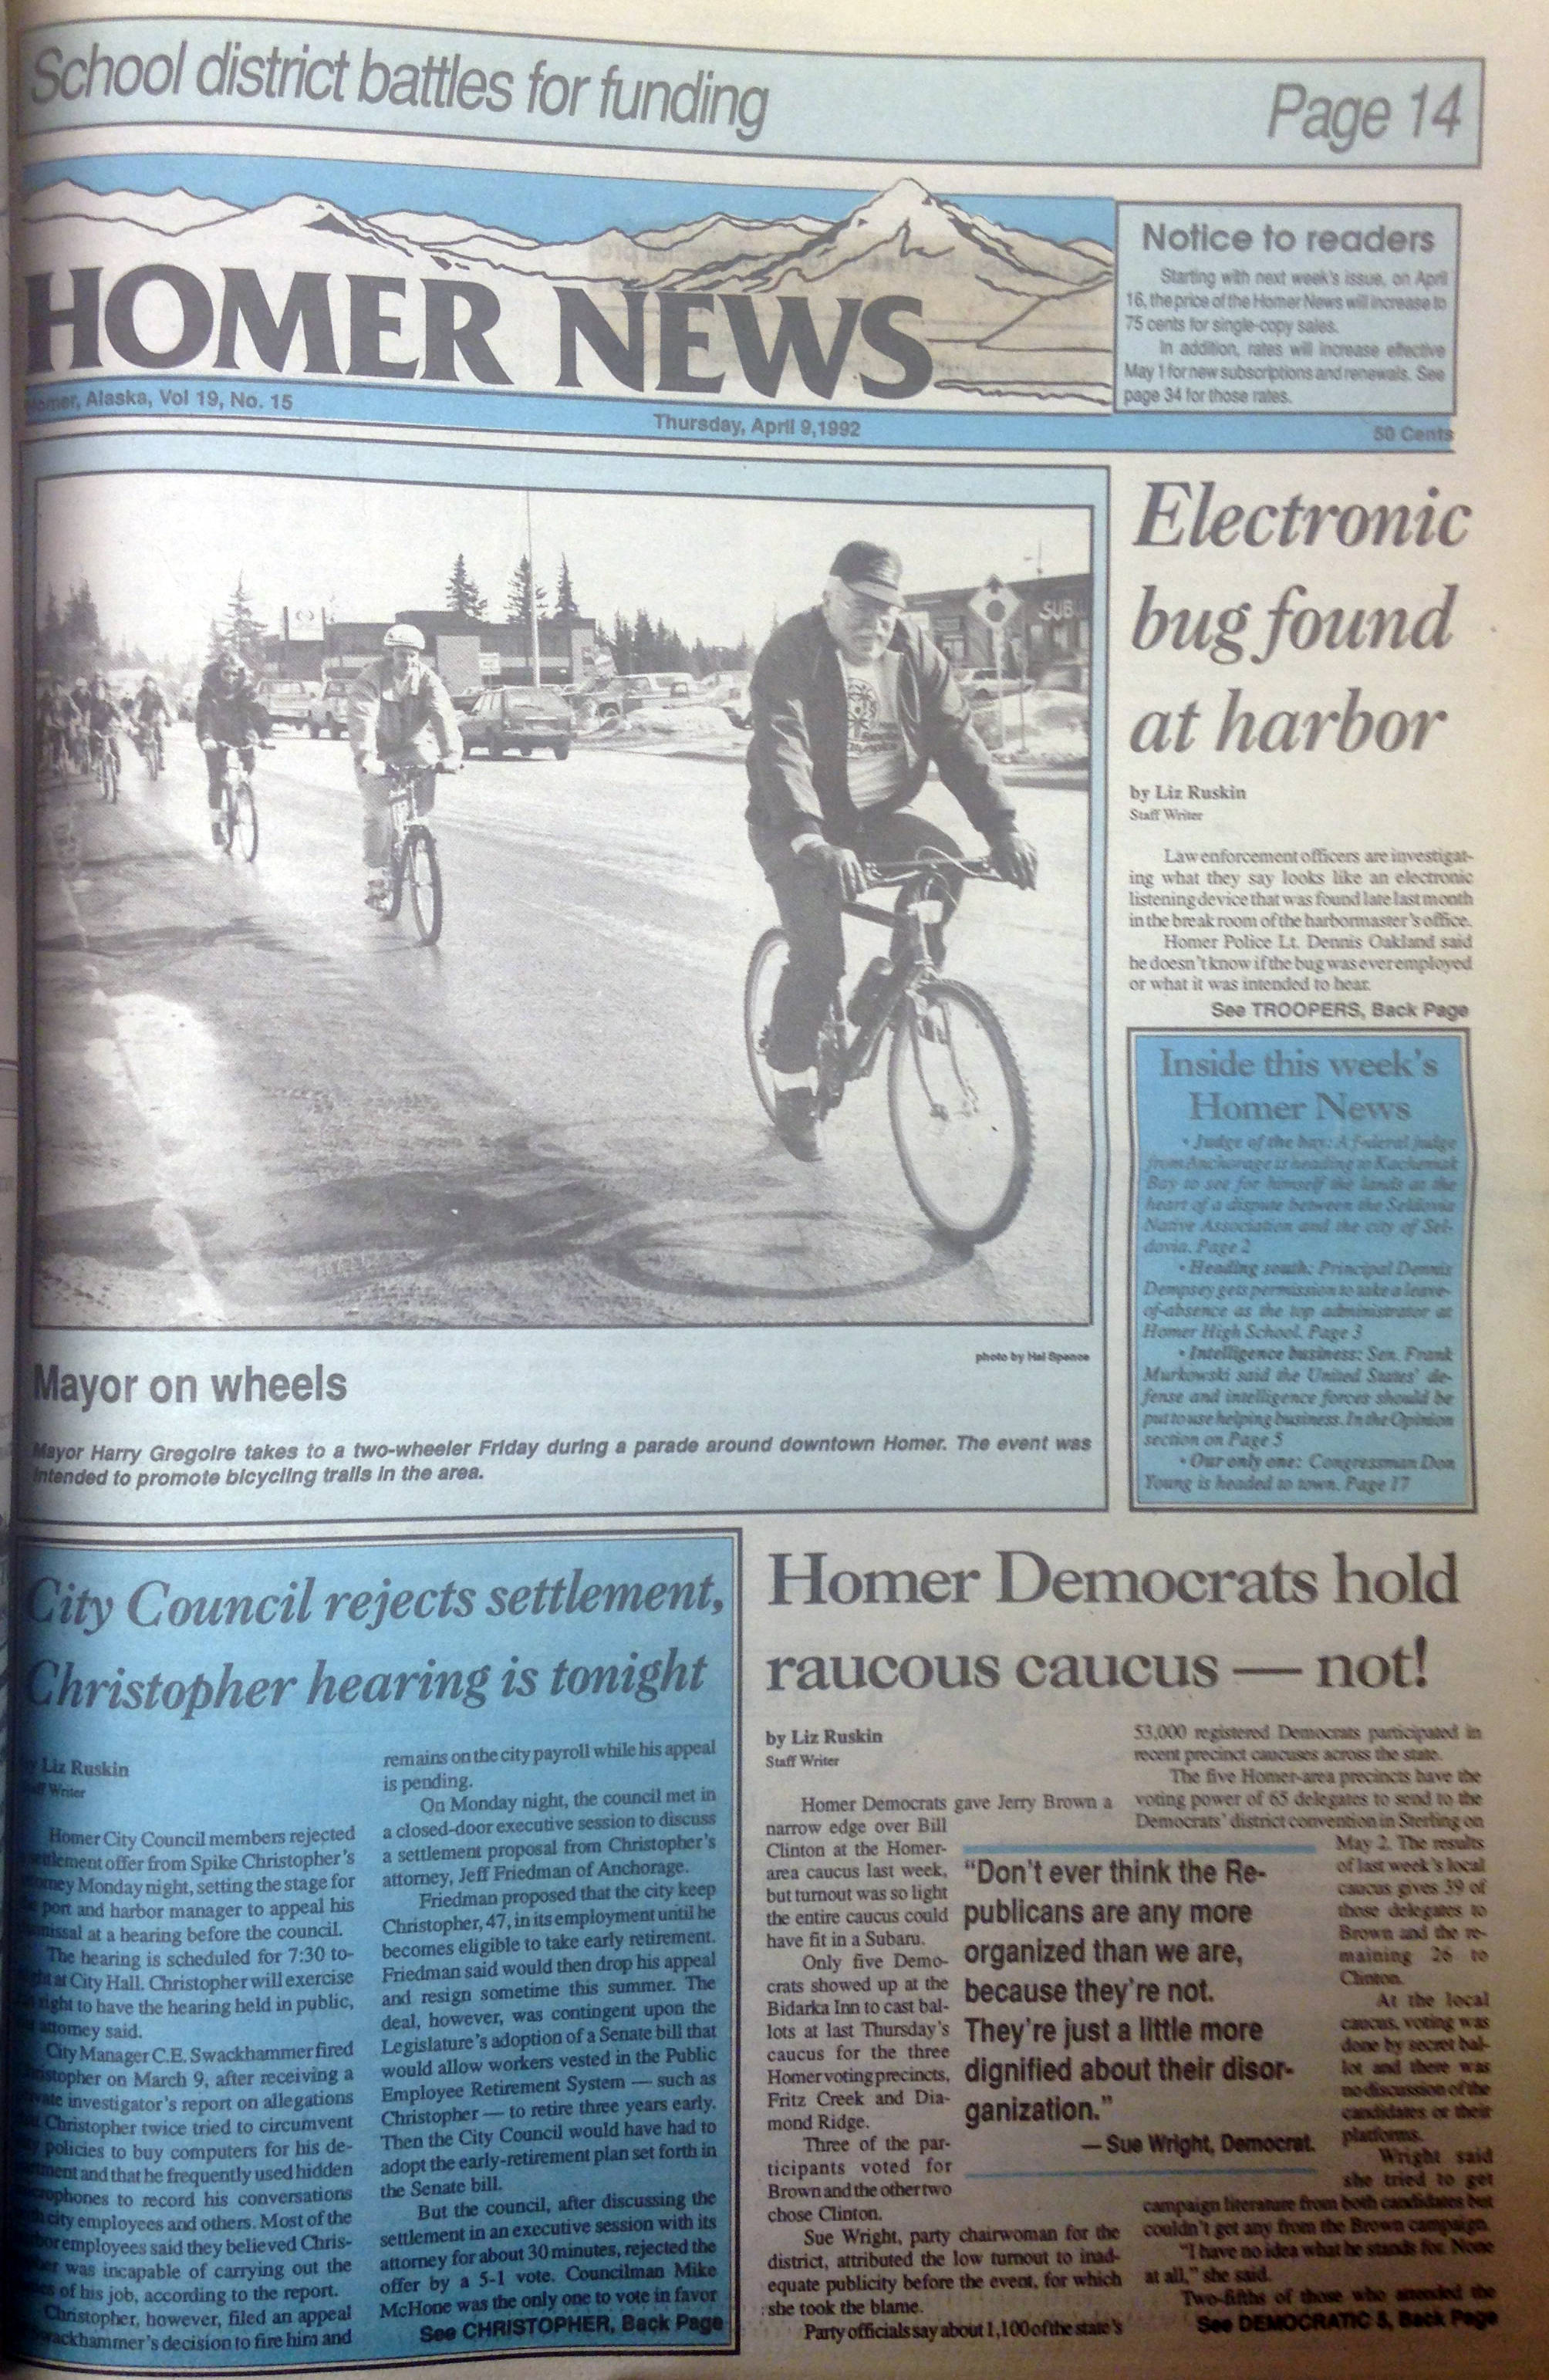 The cover of the April 3, 1992 Homer News, the last issue before the price increased from 50 cents to 75 cents. (Photo by Michael Armstrong/Homer News)